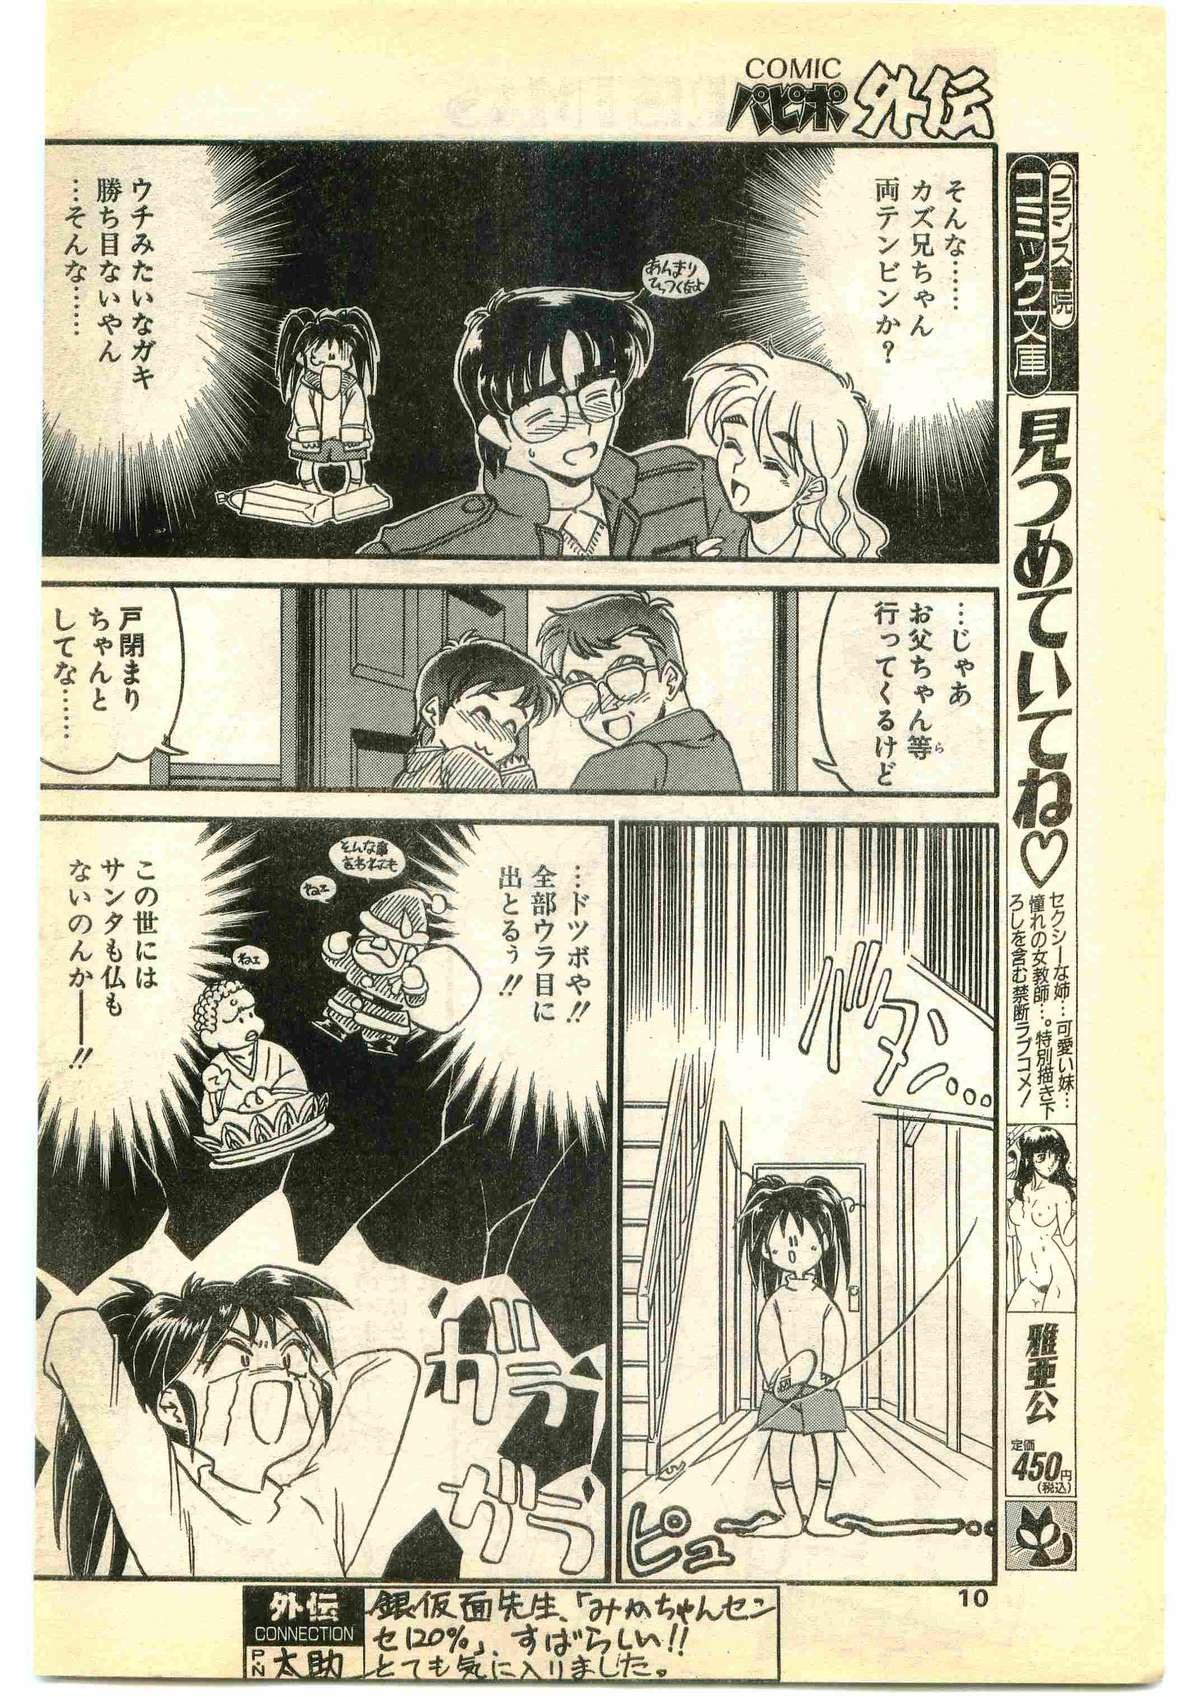 Hard Porn COMIC Papipo Gaiden 1995-01 Sapphicerotica - Page 10